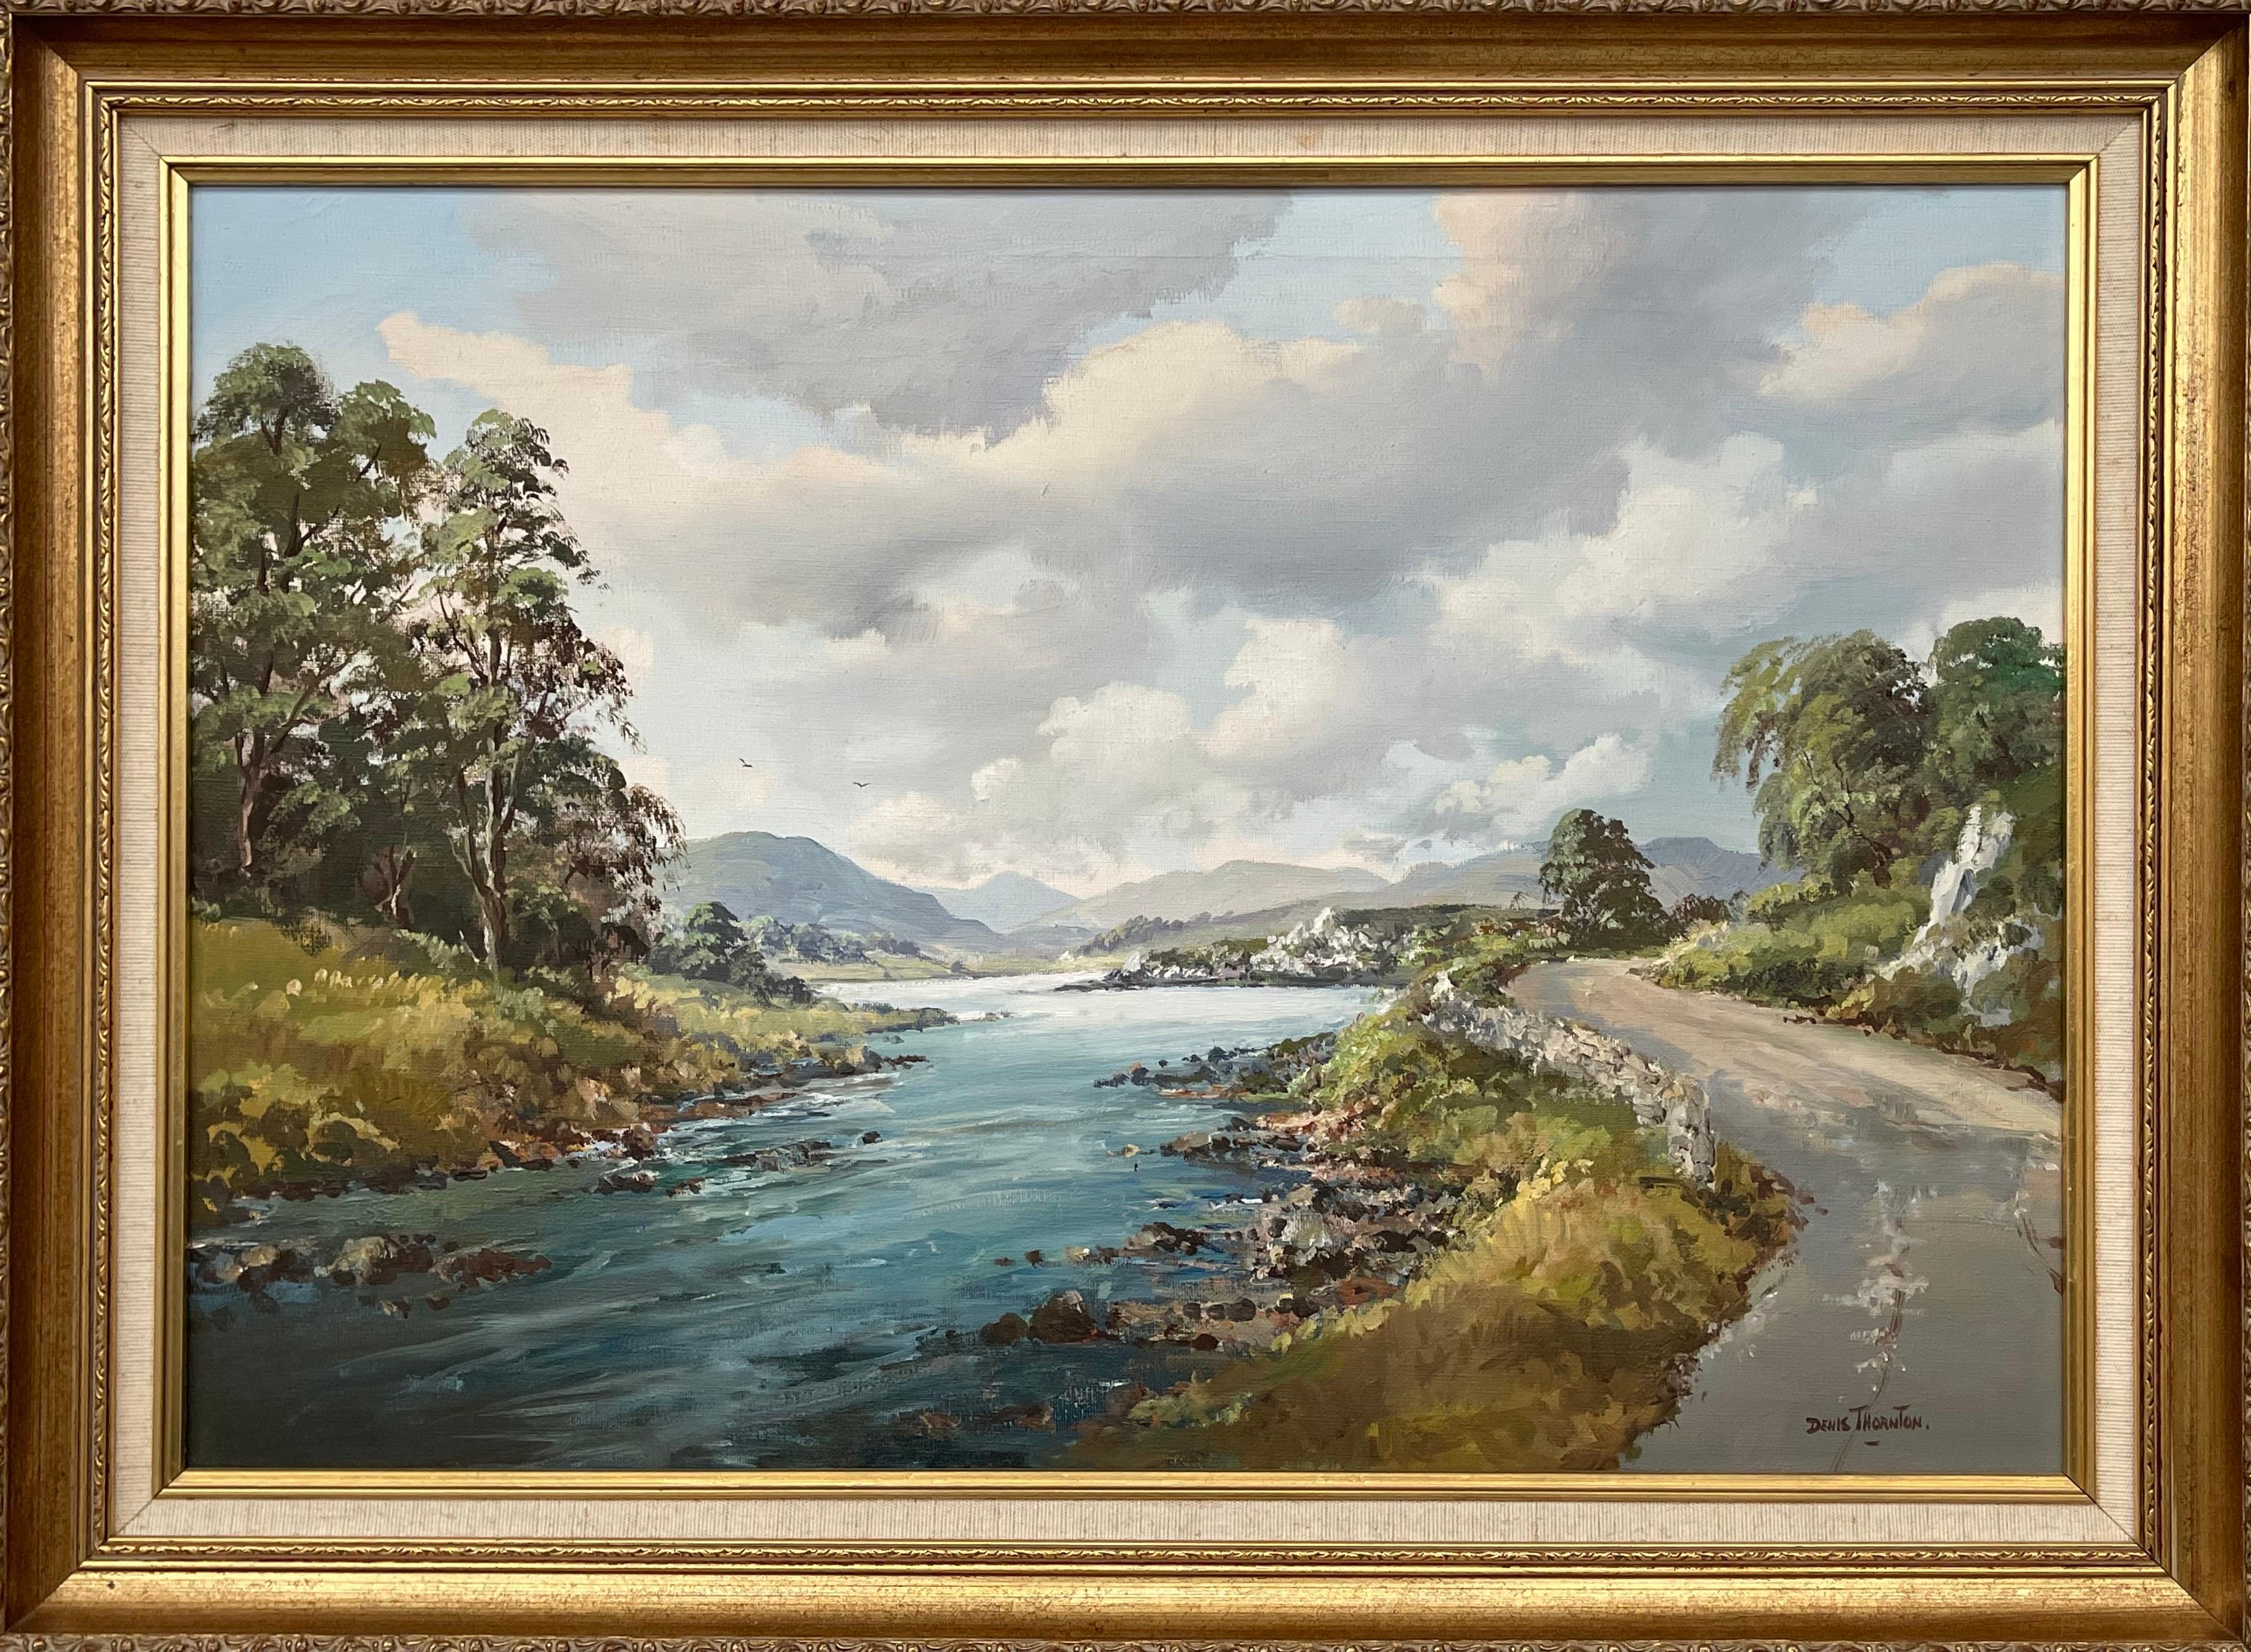 Denis Thornton Landscape Painting - Original Post-War Oil Painting of Road by the Lough in Ireland by Irish Artist